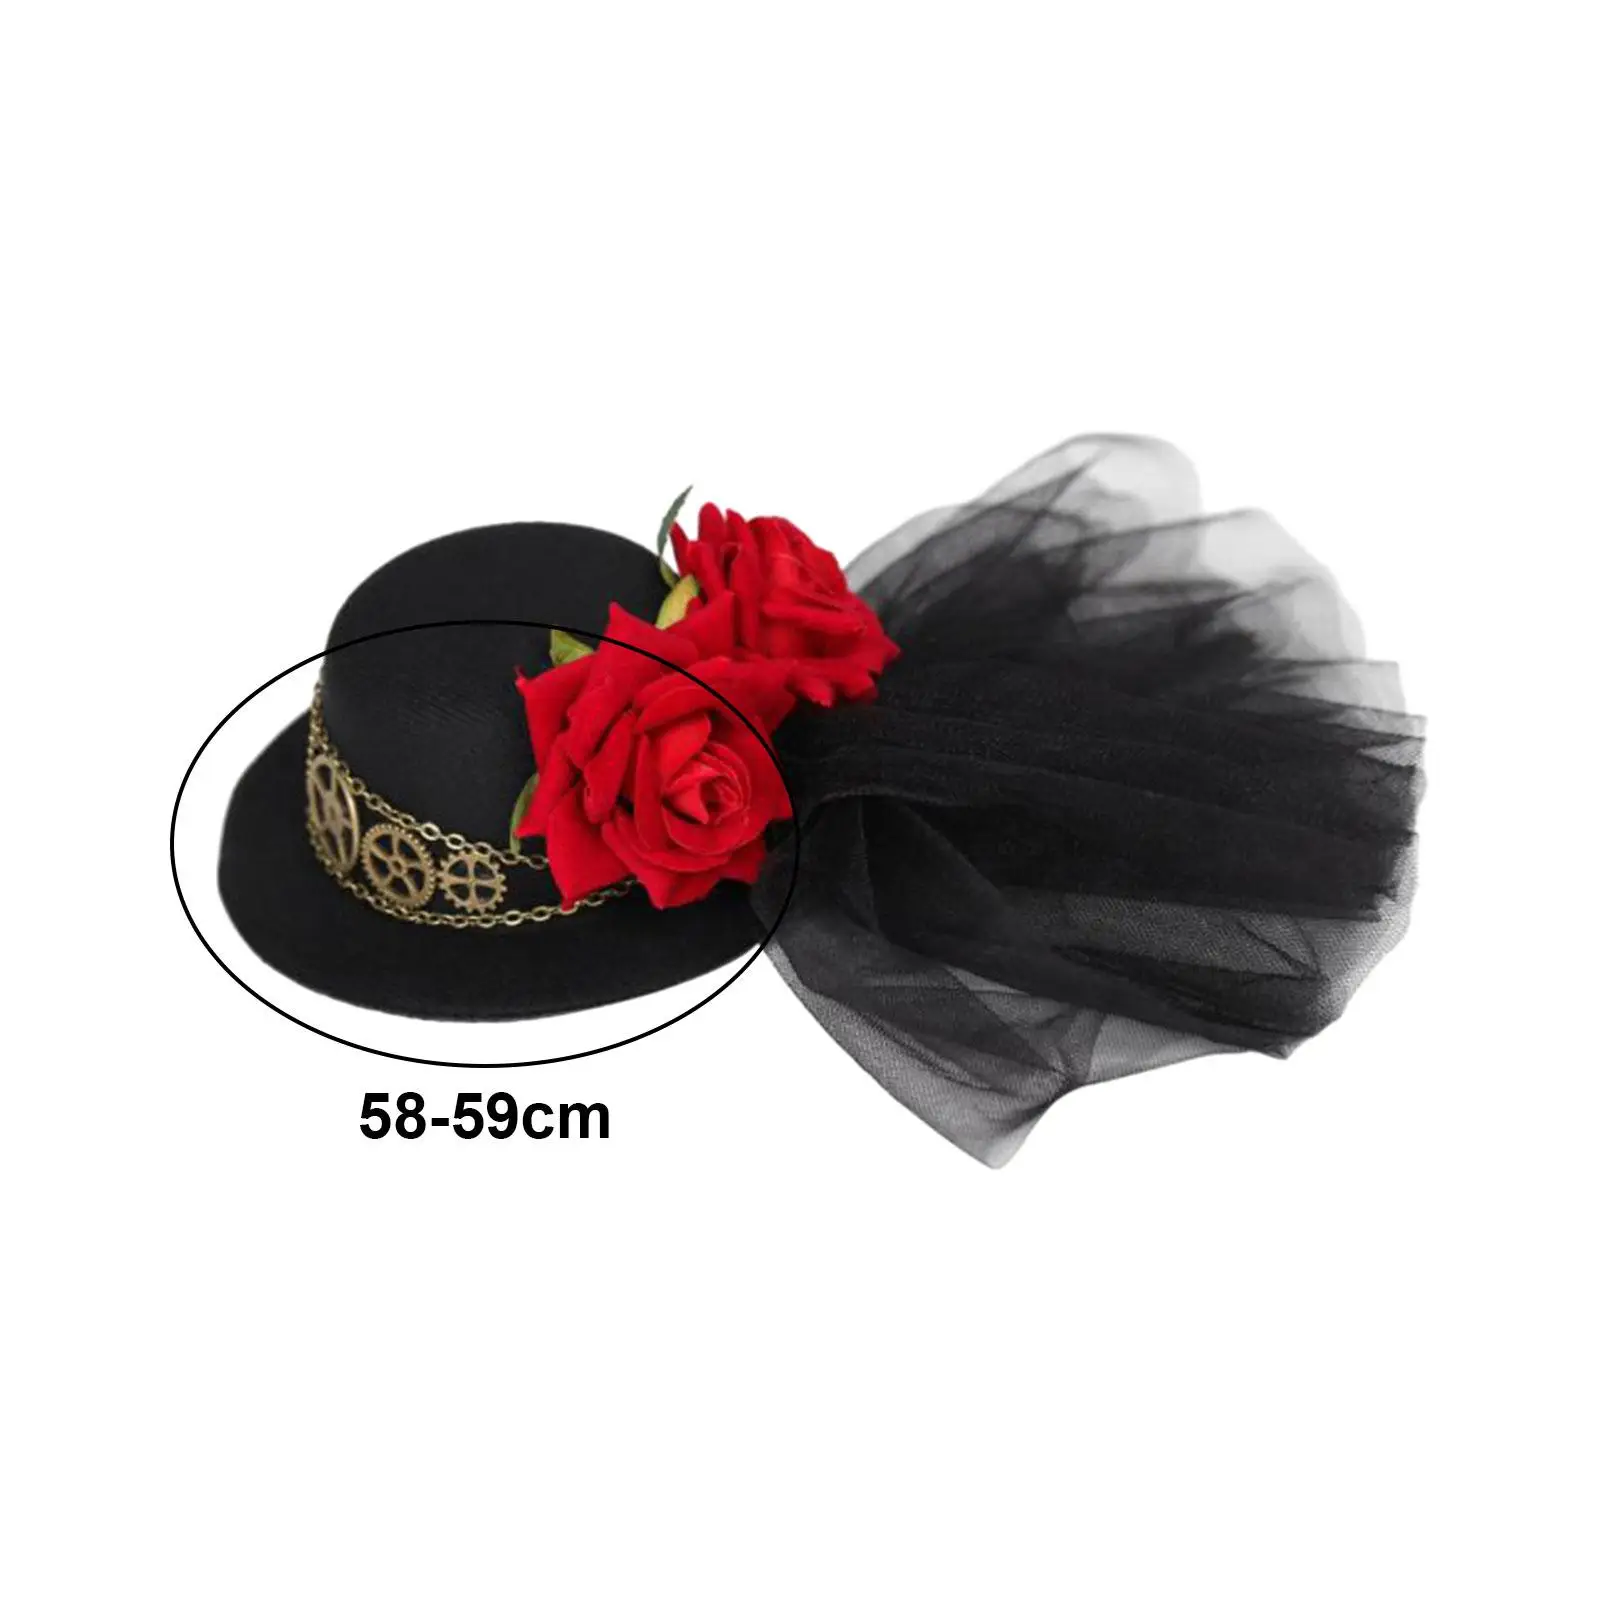 Steampunk Mini Top Hat Felt Top Hat Hairpin Dress up Costume Accessories for Dance Stage Show Cosplay Party Supplies Carnival